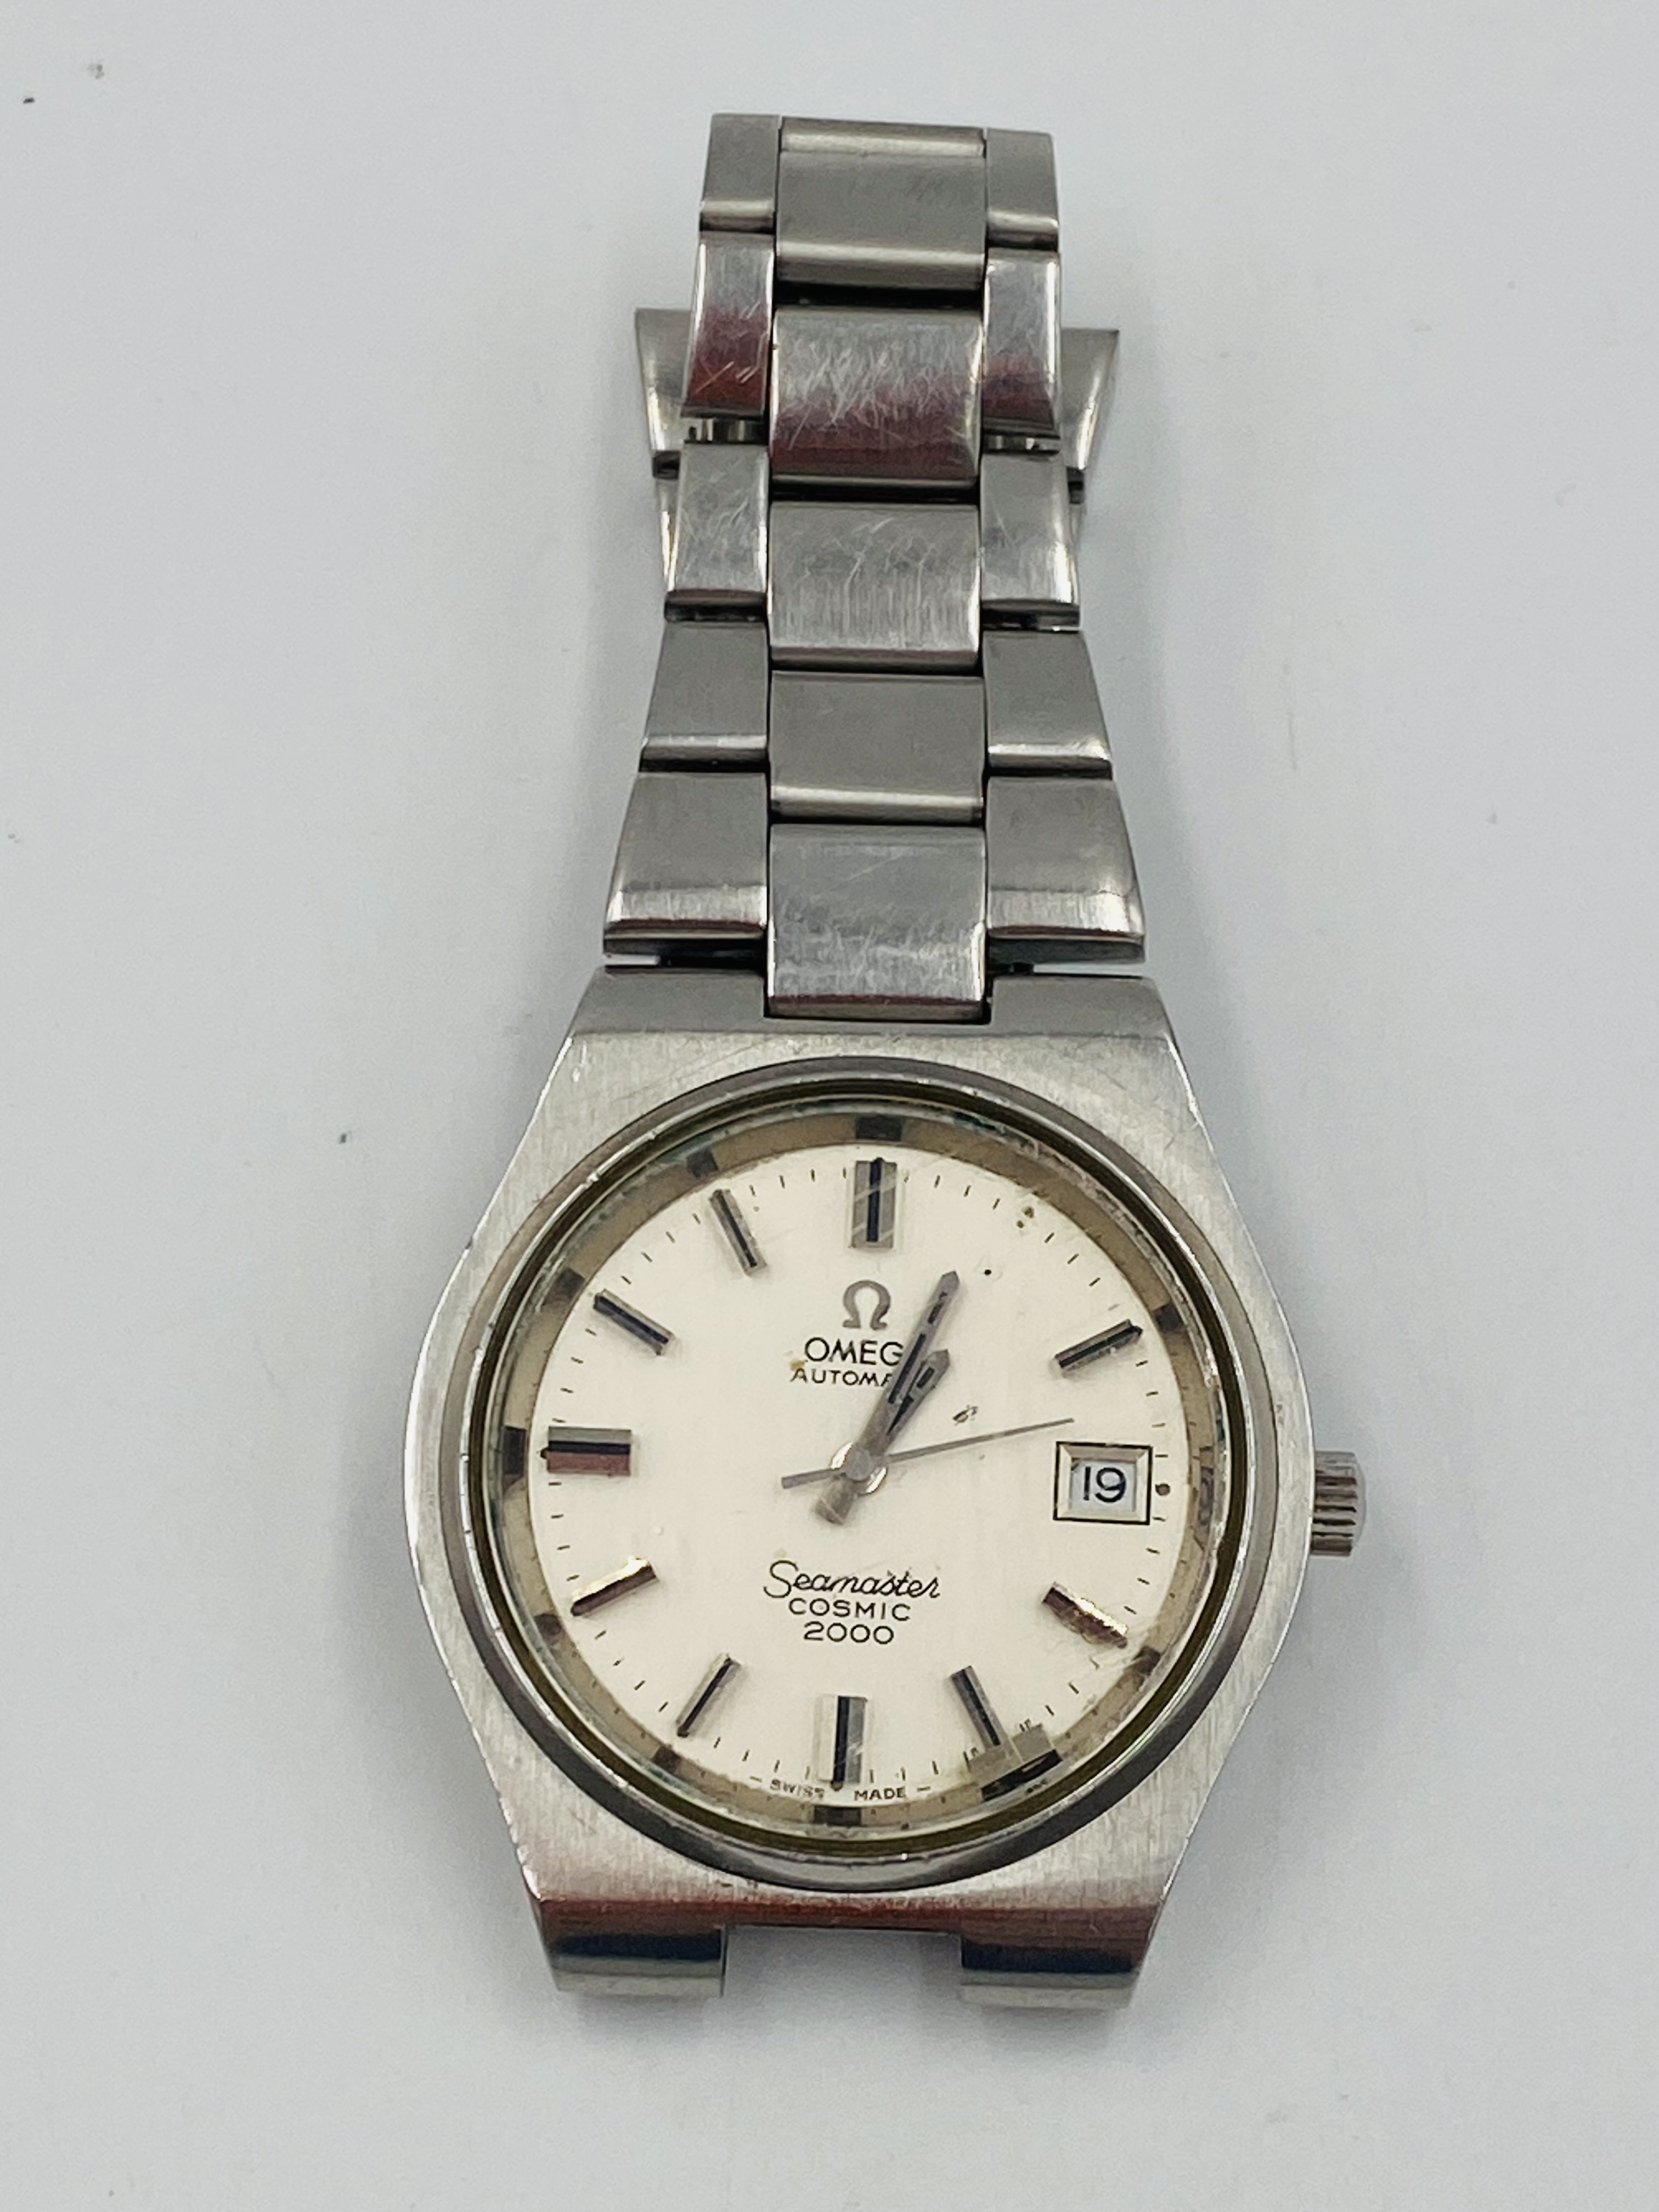 An Omega stainless steel Omega Seamaster Cosmic 2000 Automatic